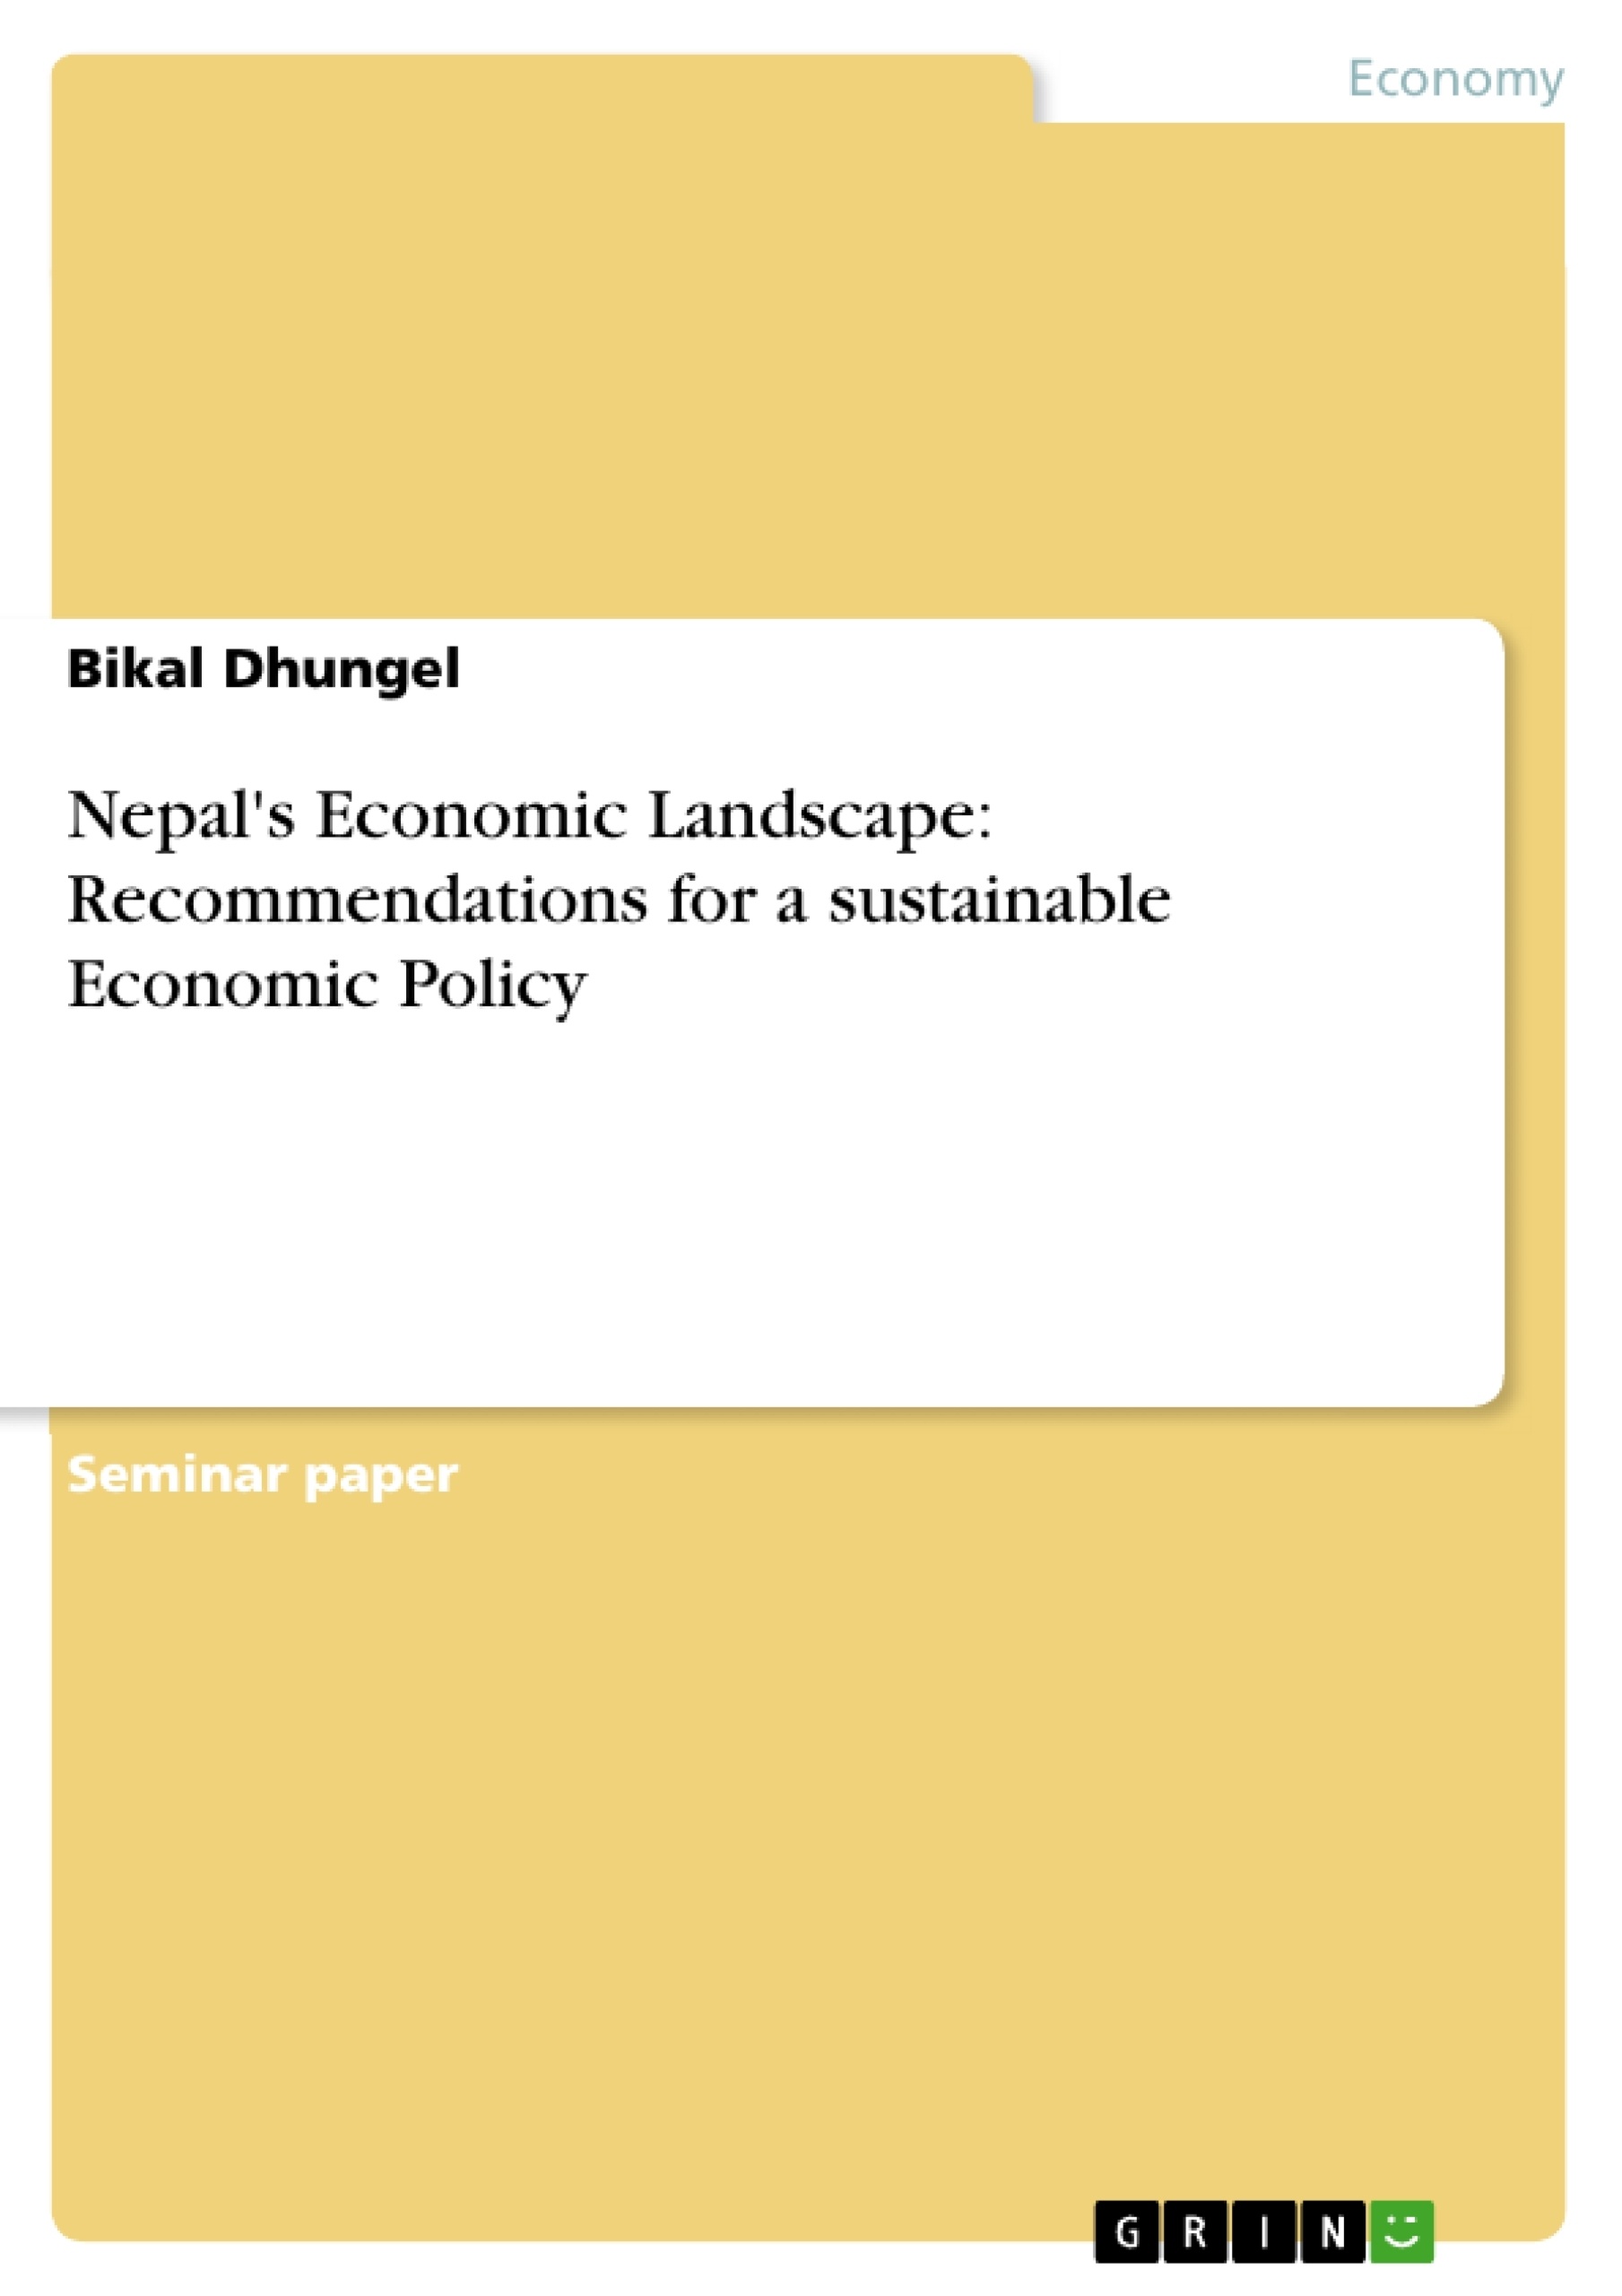 Title: Nepal's Economic Landscape: Recommendations for a sustainable Economic Policy